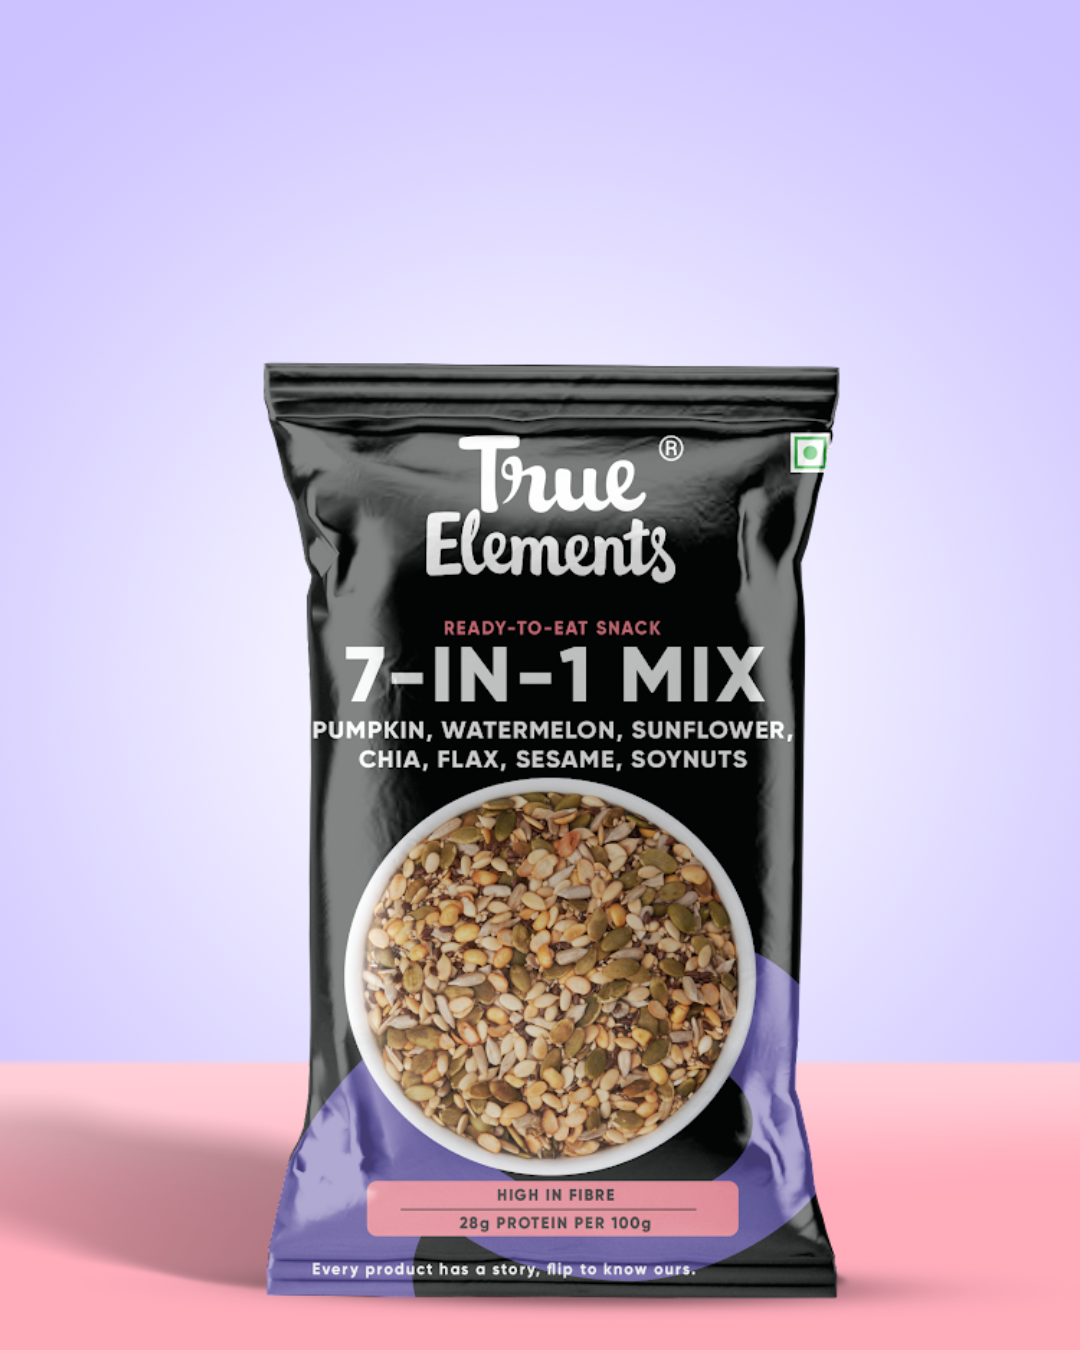 7 in 1 mix with pumpkin, watermelon, sunflower, chia, flax, sesame, & soynuts in 30g pouch.